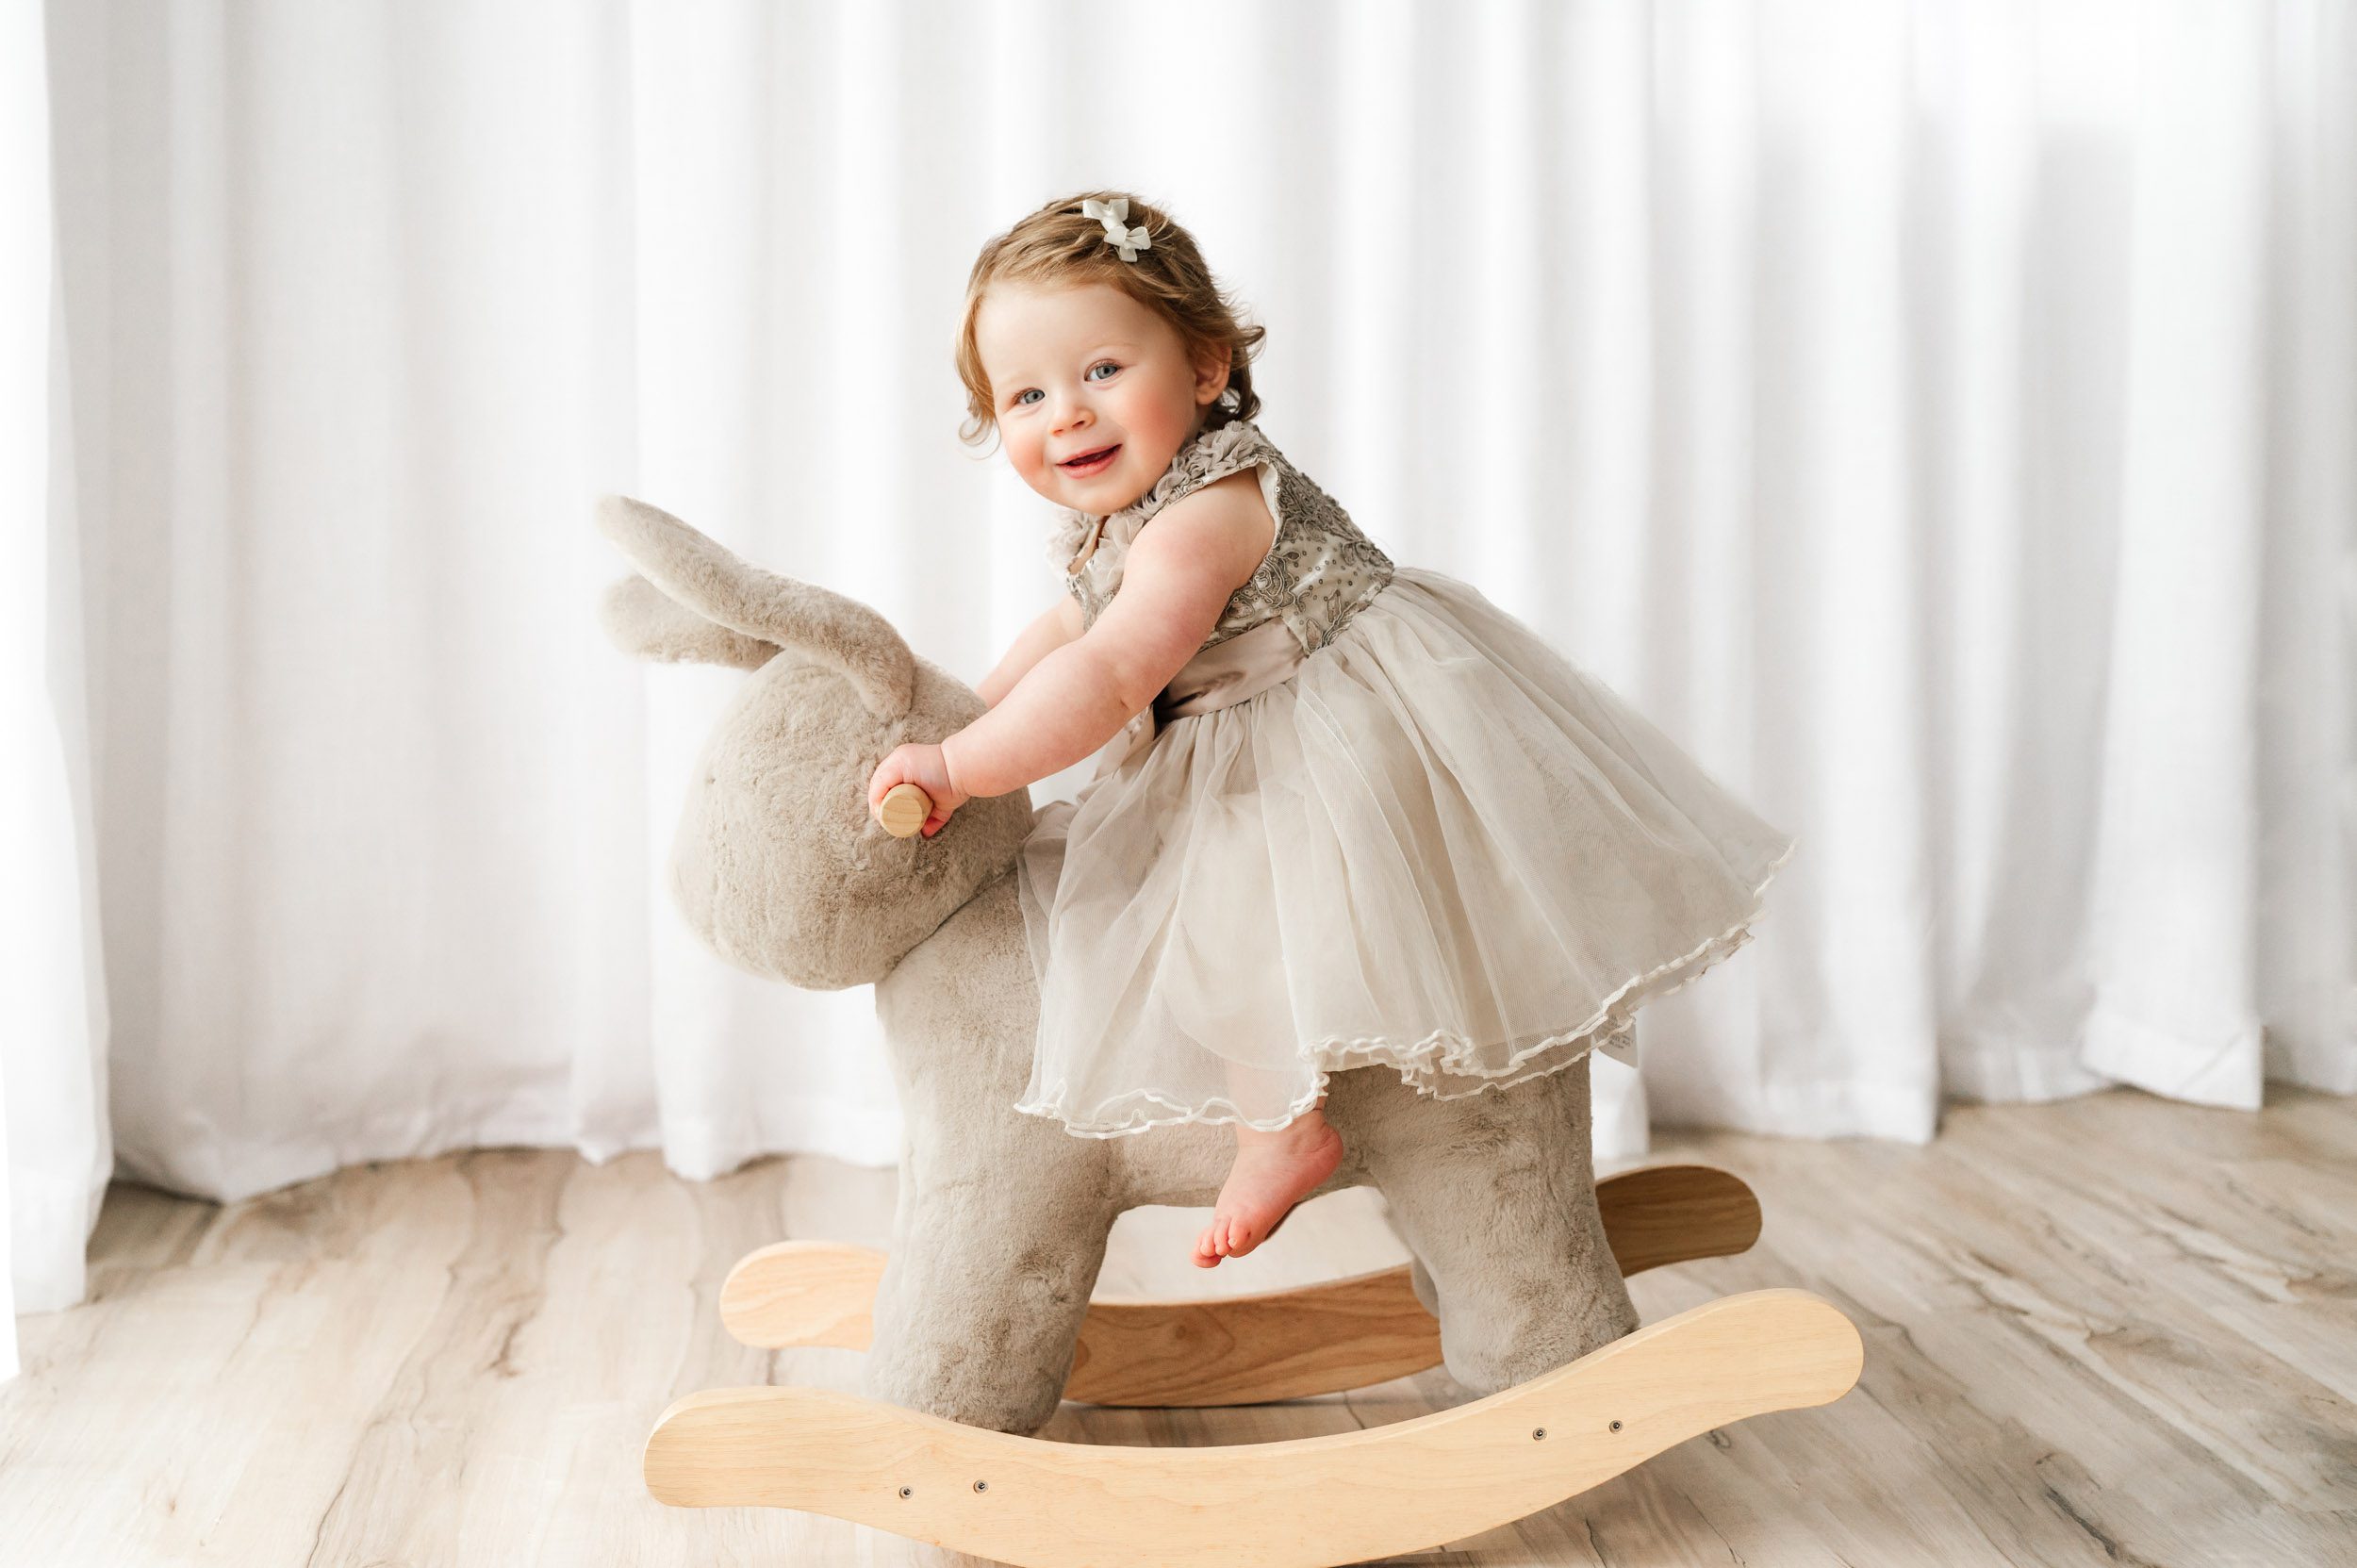 a young girl riding on a bunny rocker toy as she looks at the camera and smiles during a 1st birthday milestone photoshoot